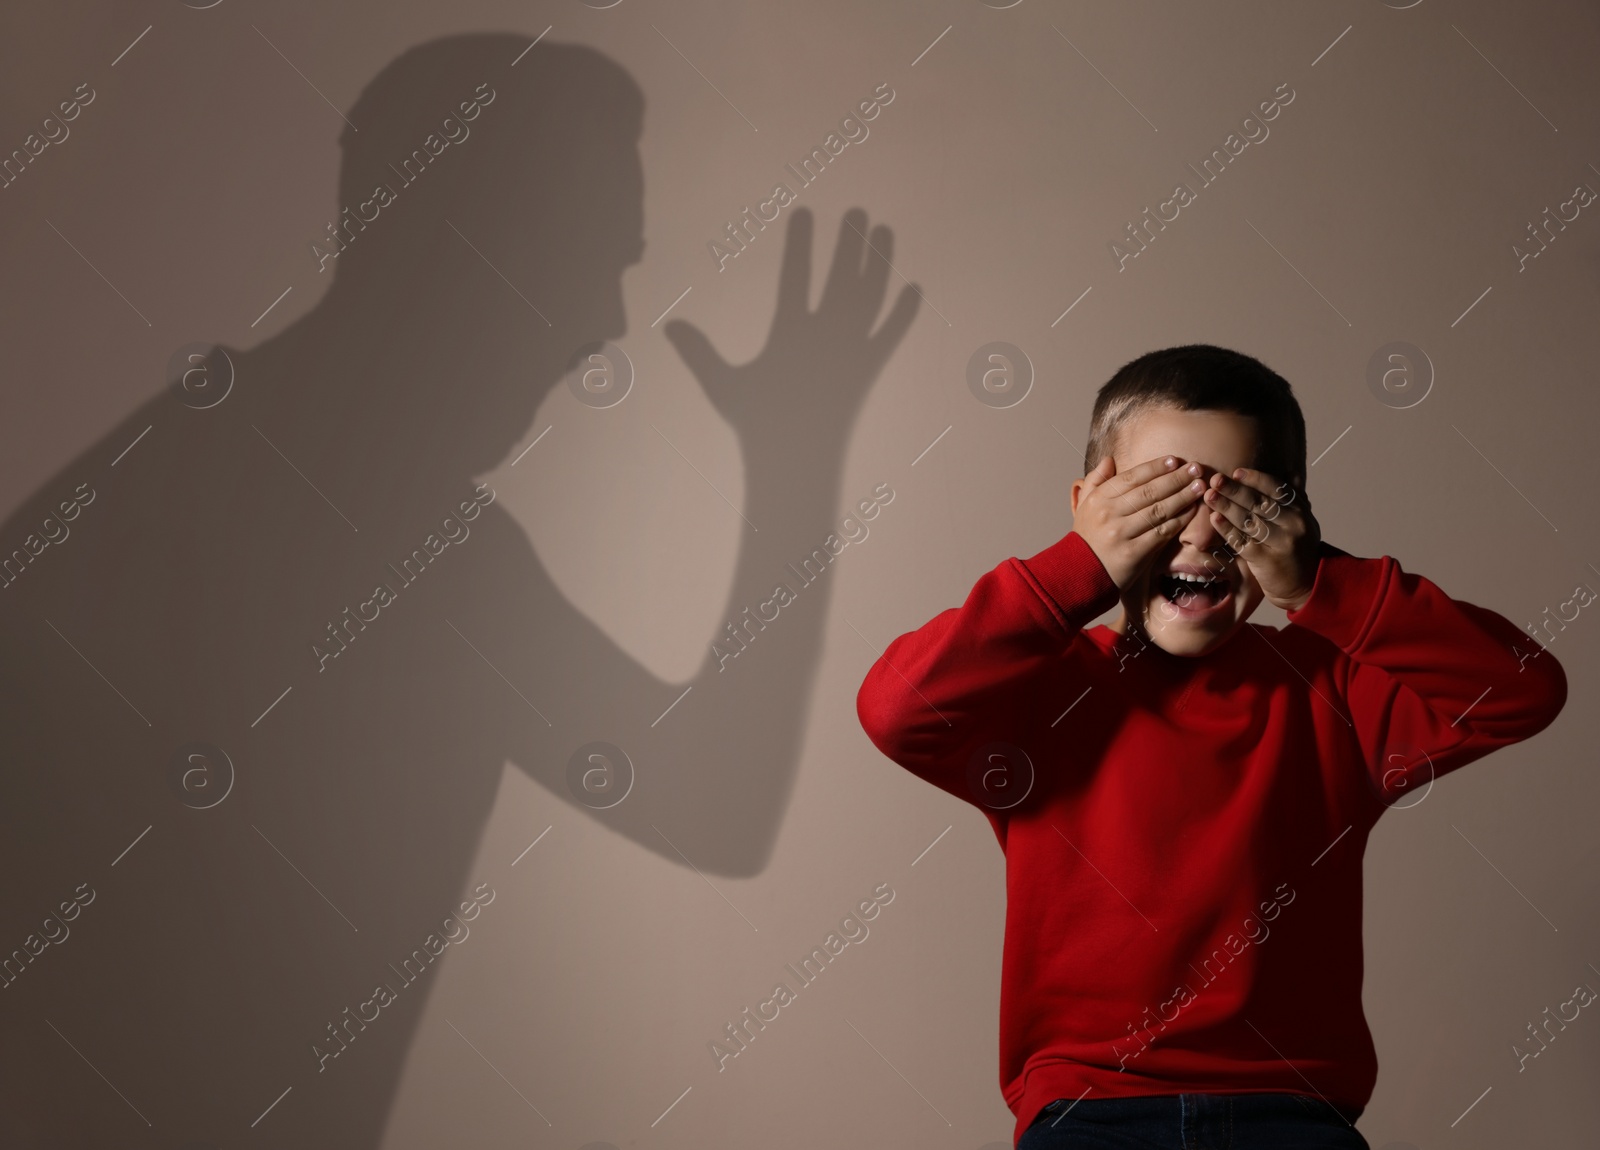 Image of Child abuse. Father yelling at his son. Shadow of man on wall